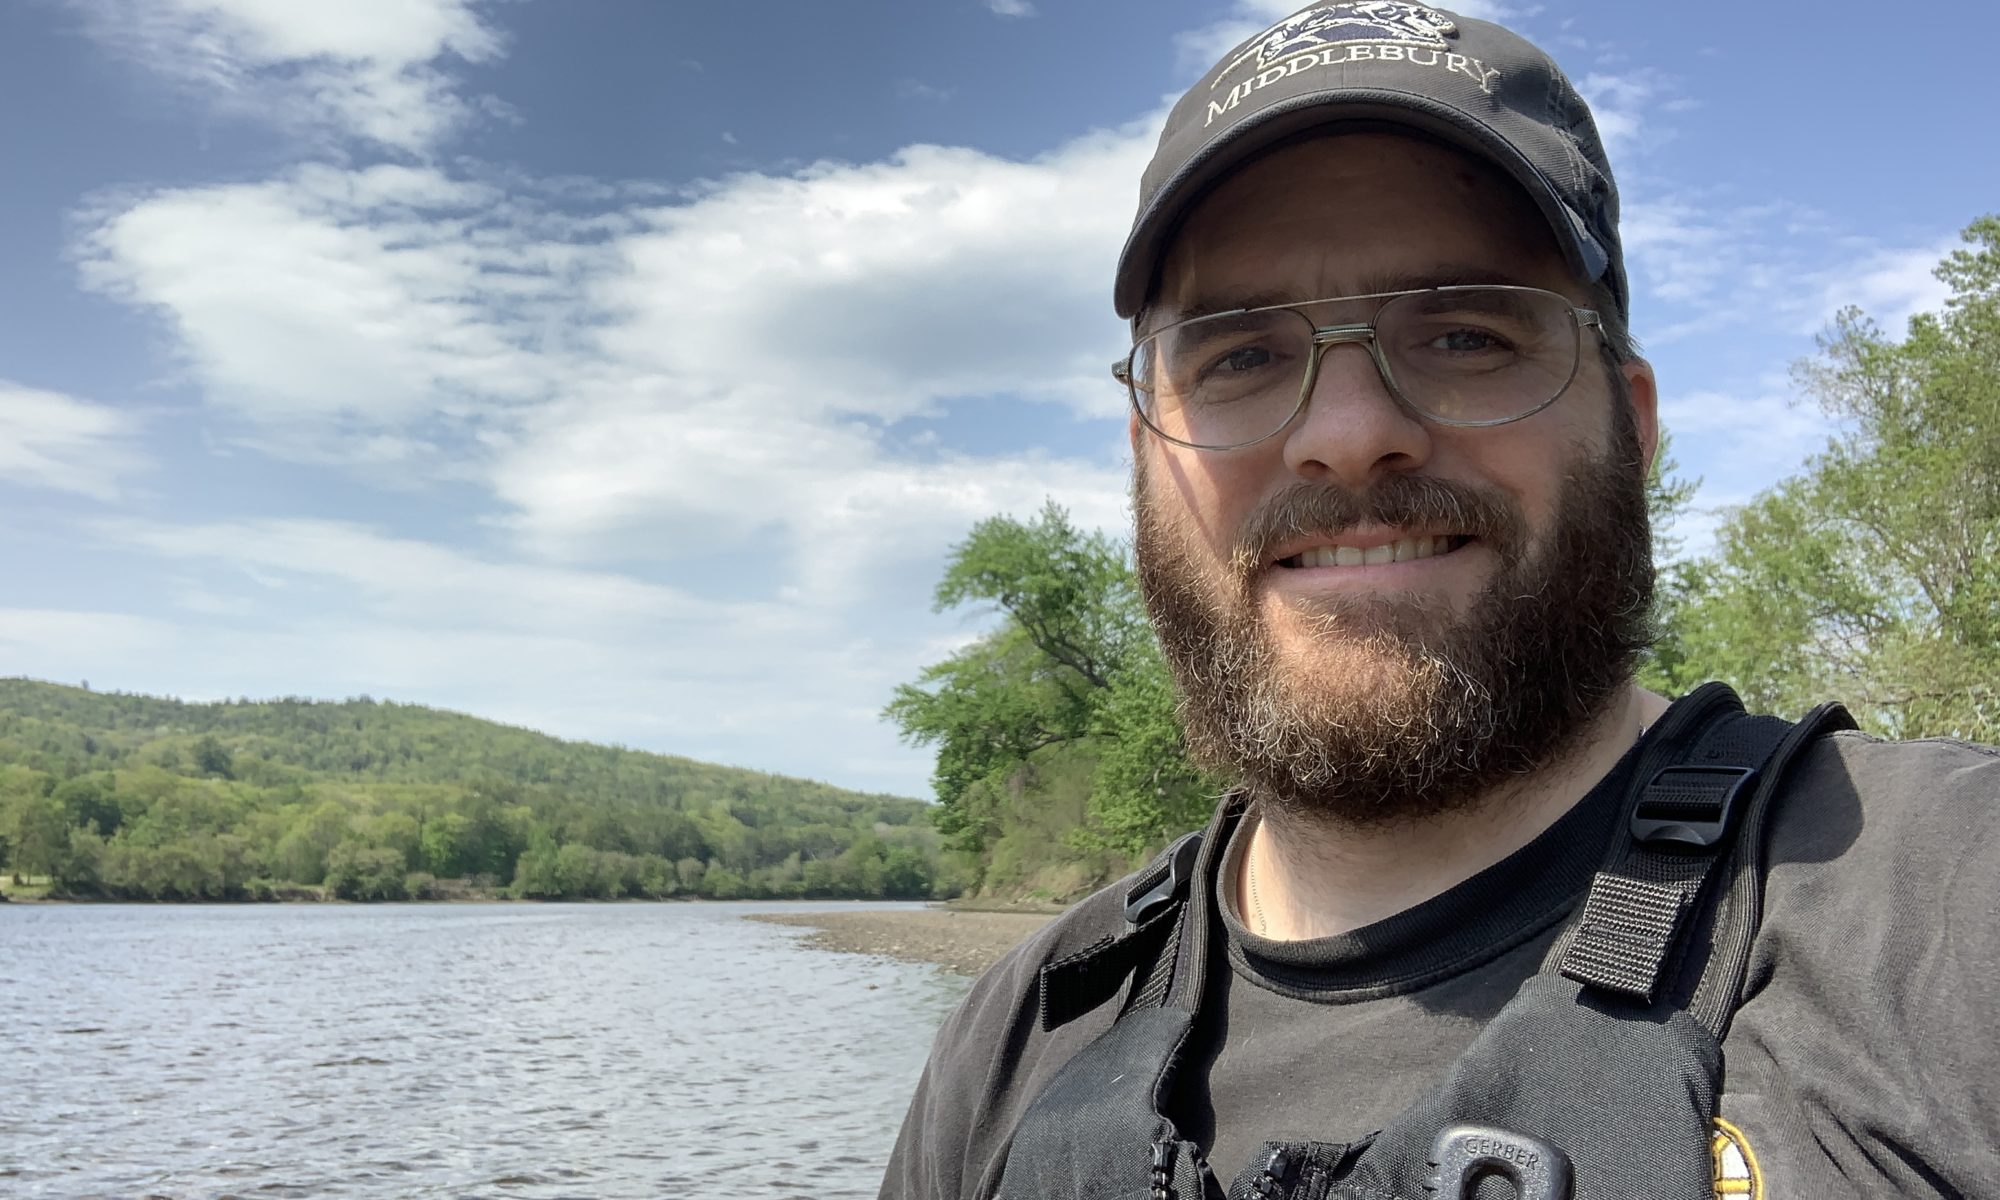 Andrew, a man with a beard wearing a baseball cap and a life jacket, with a river and forest behind him.